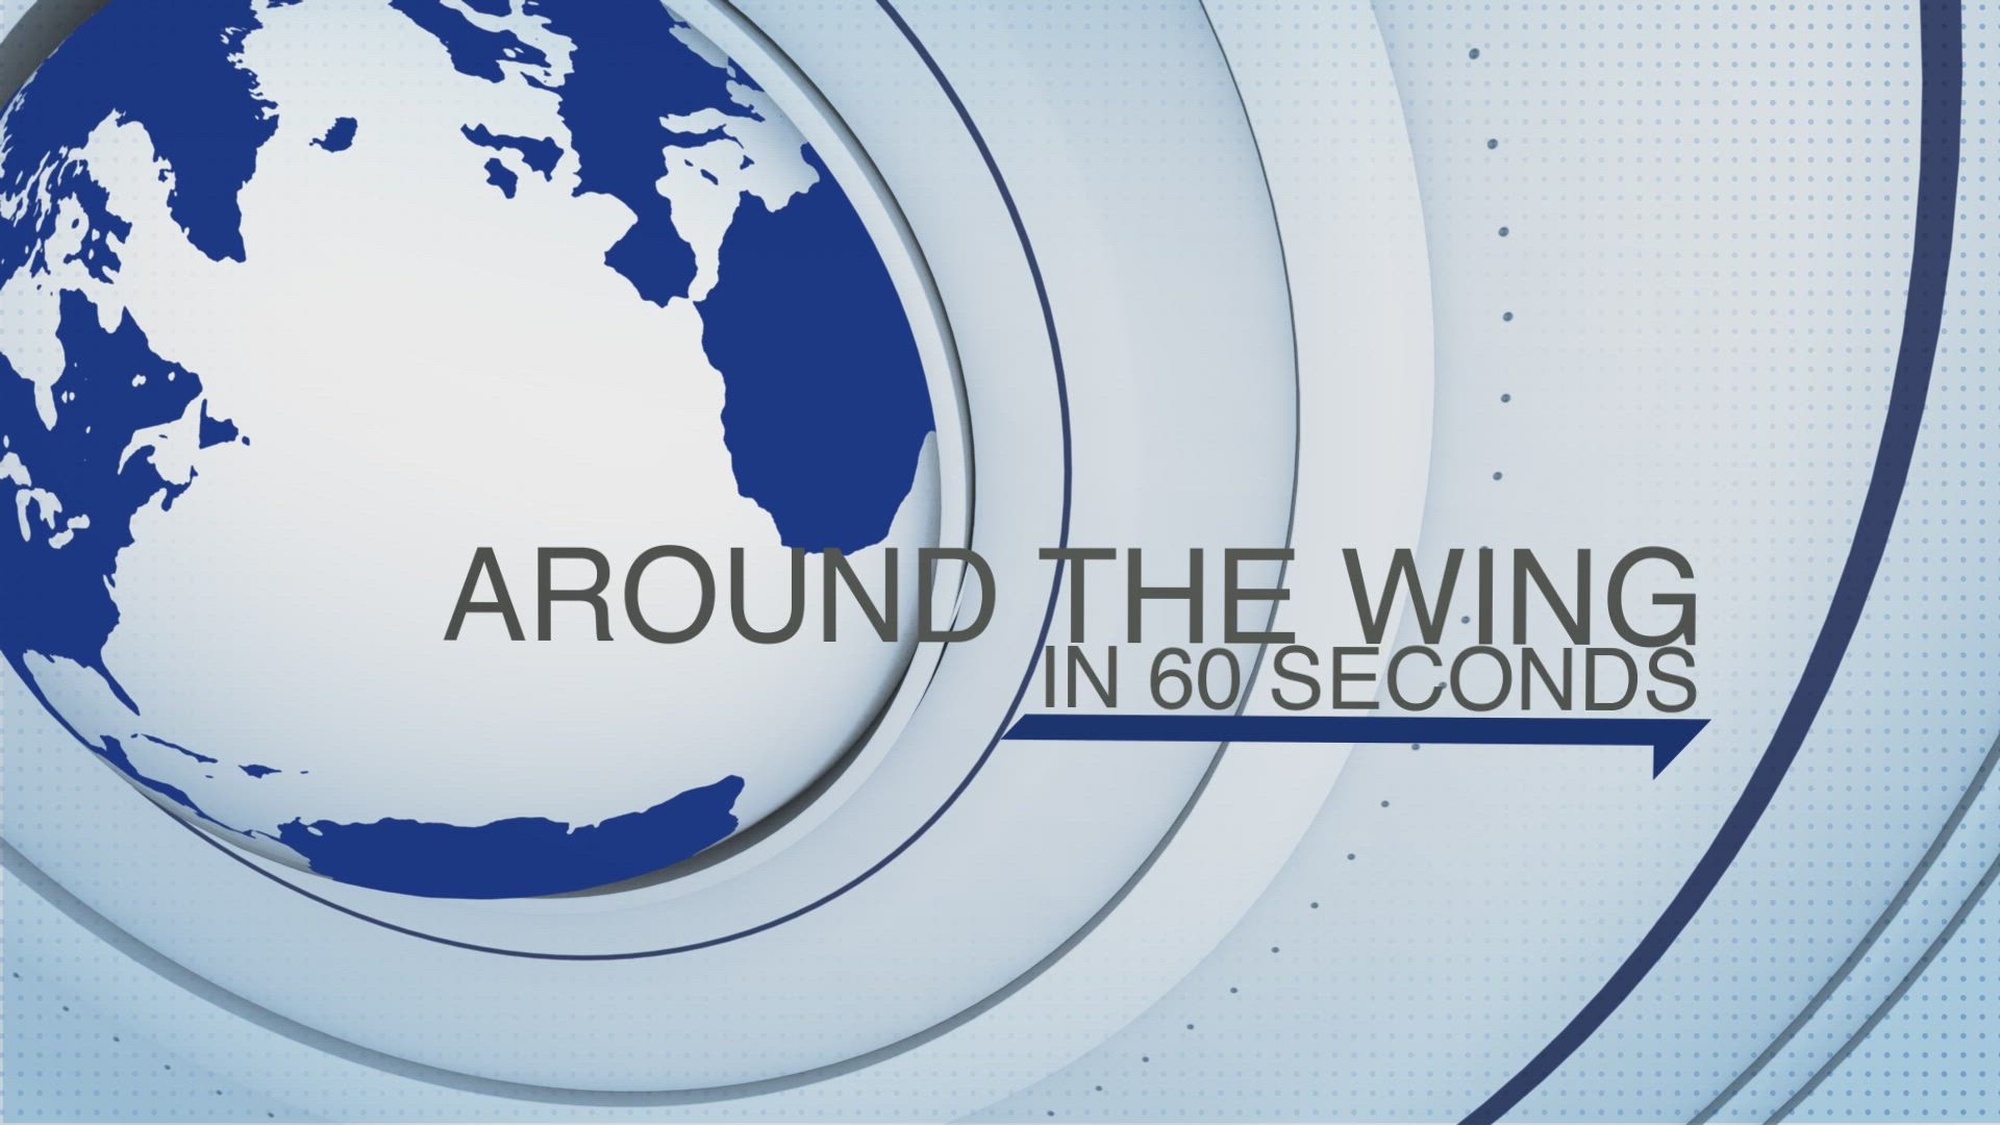 In this issue of Around the Wing in 60 Seconds we recap the May 2022 Unit Training Assembly featuring; 22nd Air Force Command Team visit, Logistics Readiness Squadron Change of Command, 908th Airlift Wing Family Day.